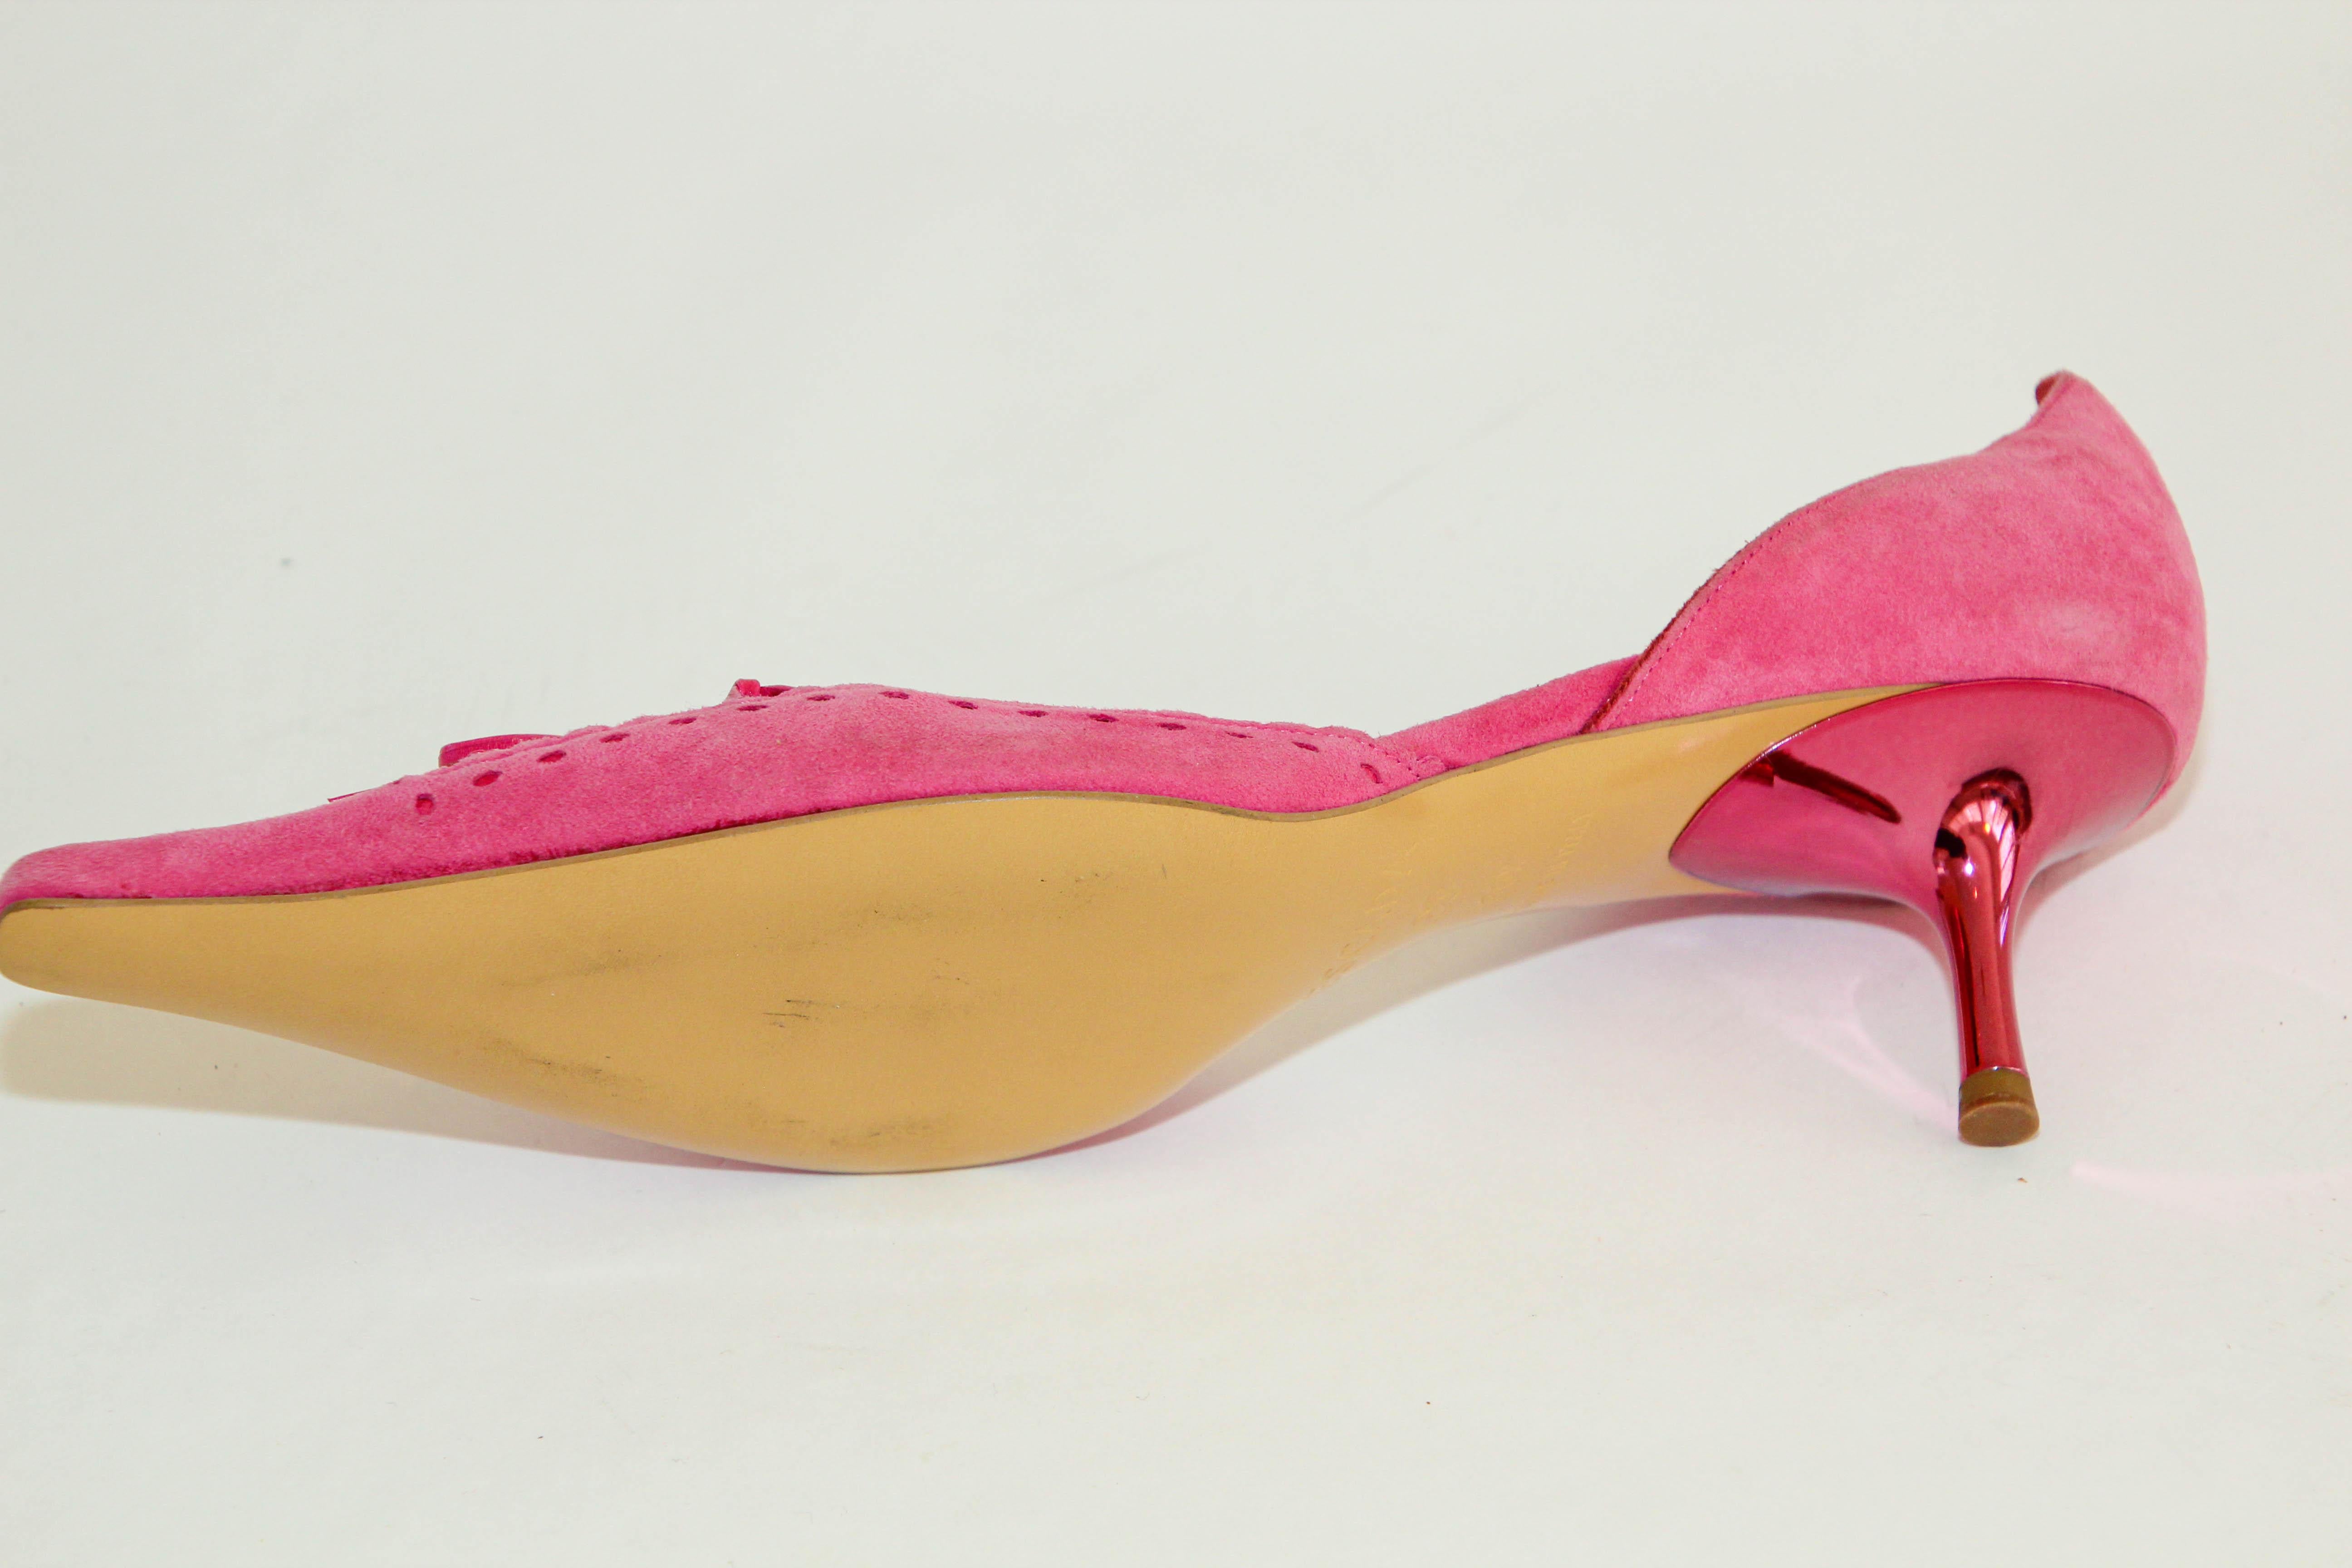 Escada Hot Pink Suede Pumps with Leather Details Size 36.5 Italy 4